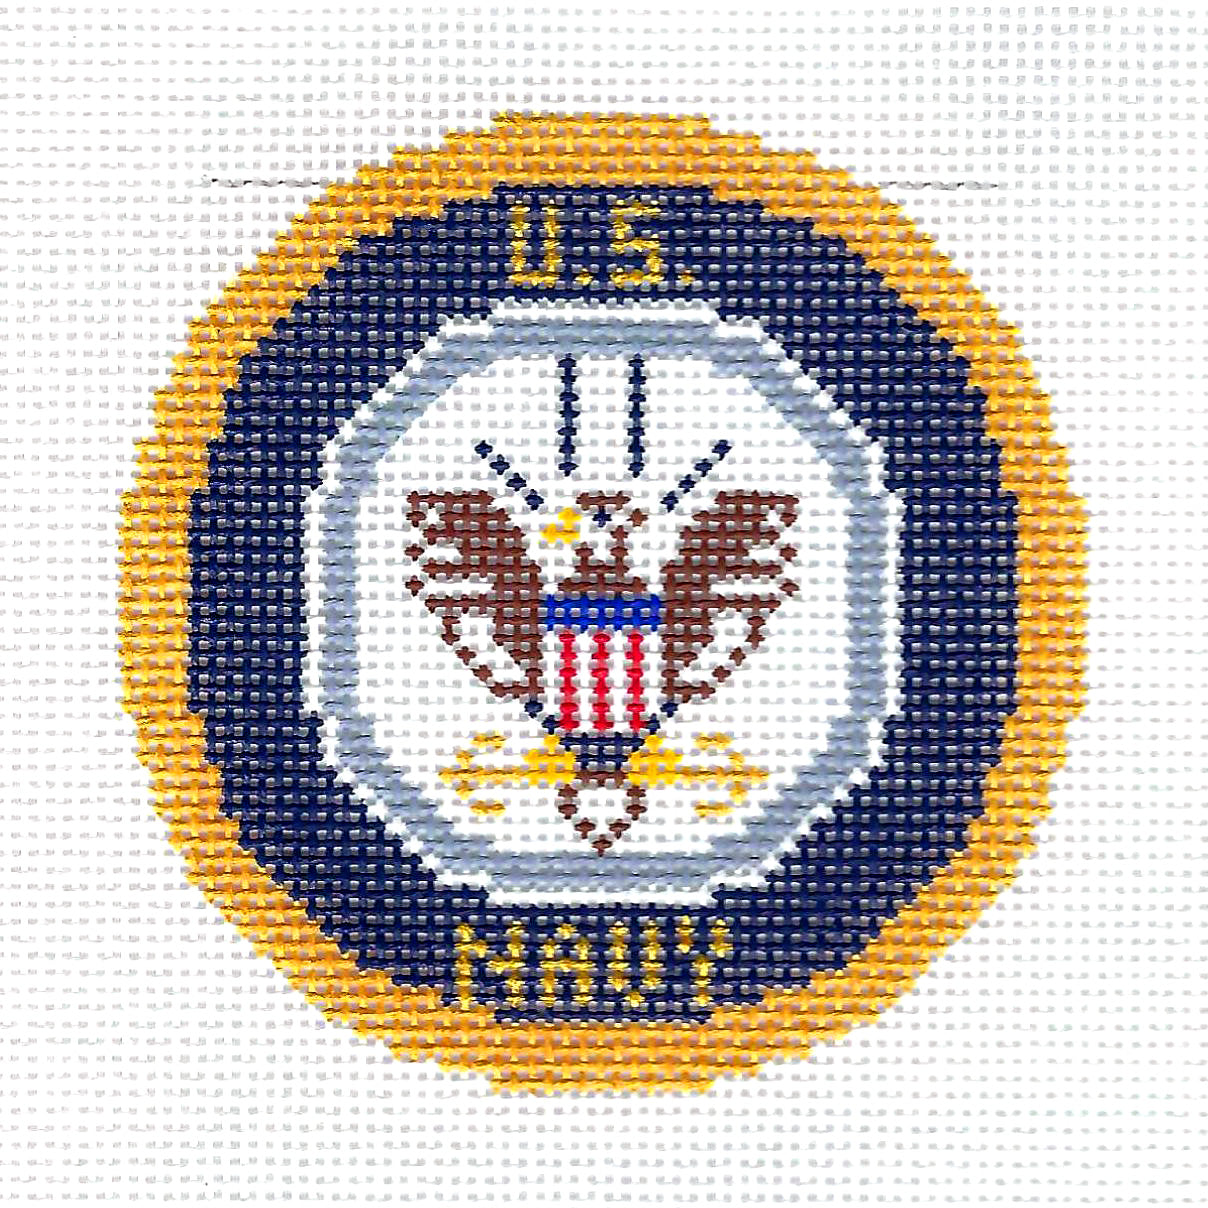 Military ~ U.S. NAVY Military Emblem handpainted 18 mesh 3" Rd. Needlepoint Canvas Ornament by LEE